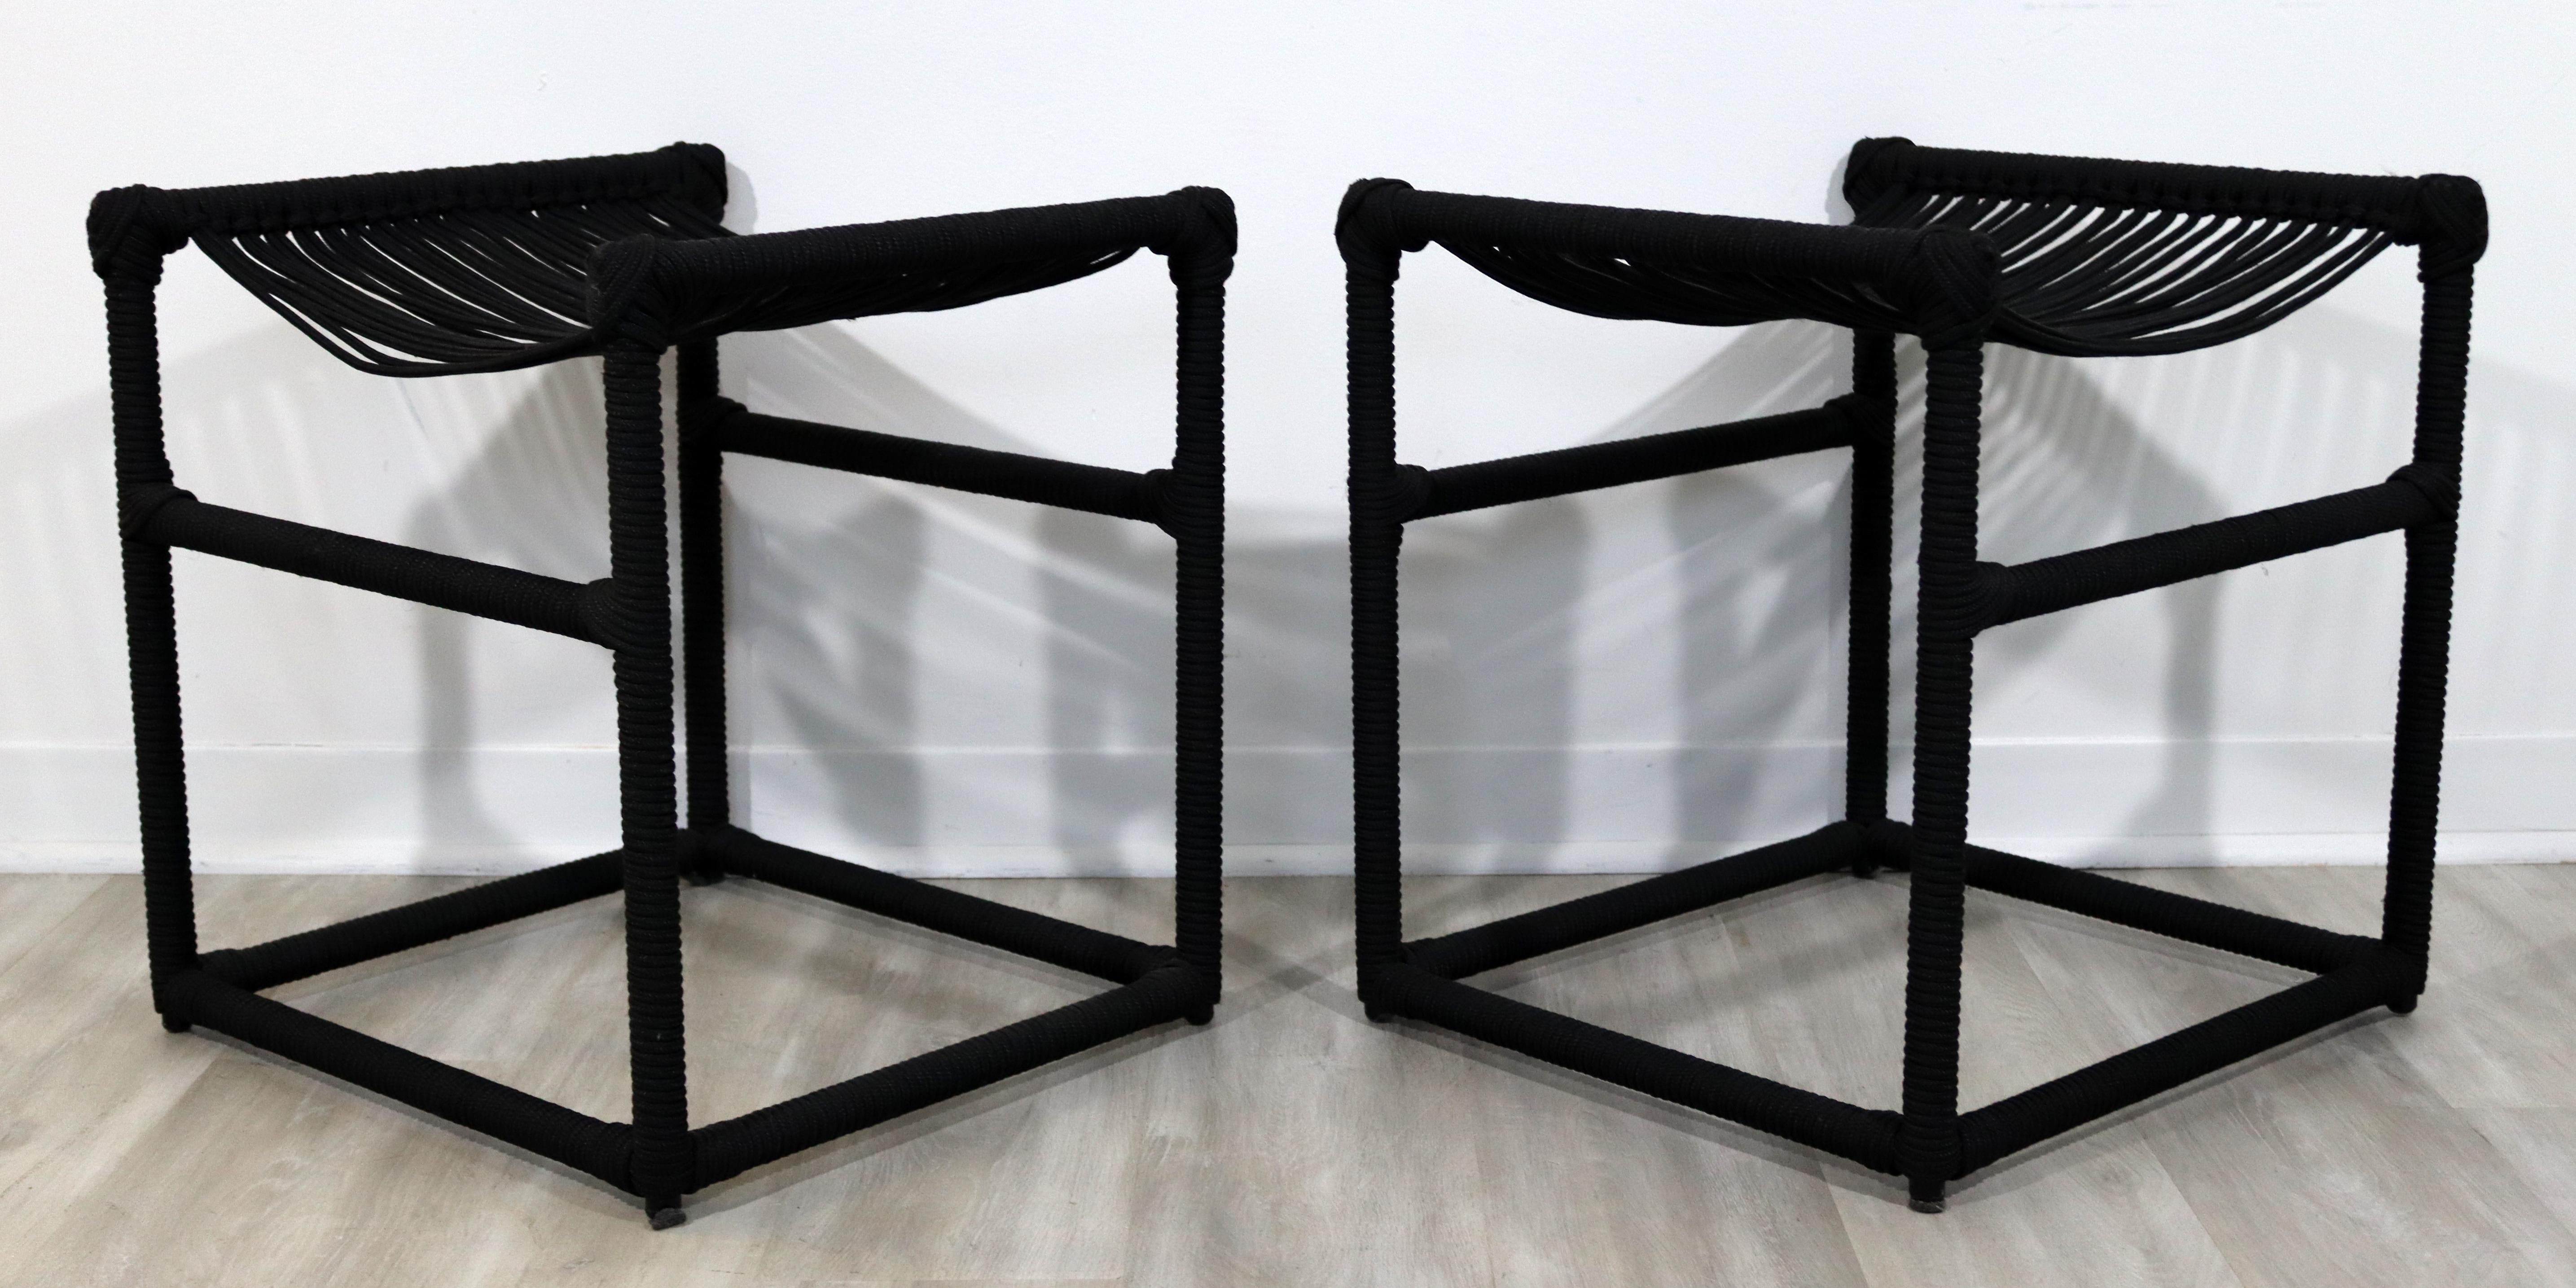 Late 20th Century Contemporary Pair of Black Rope Stools Bench Seats Ottomans